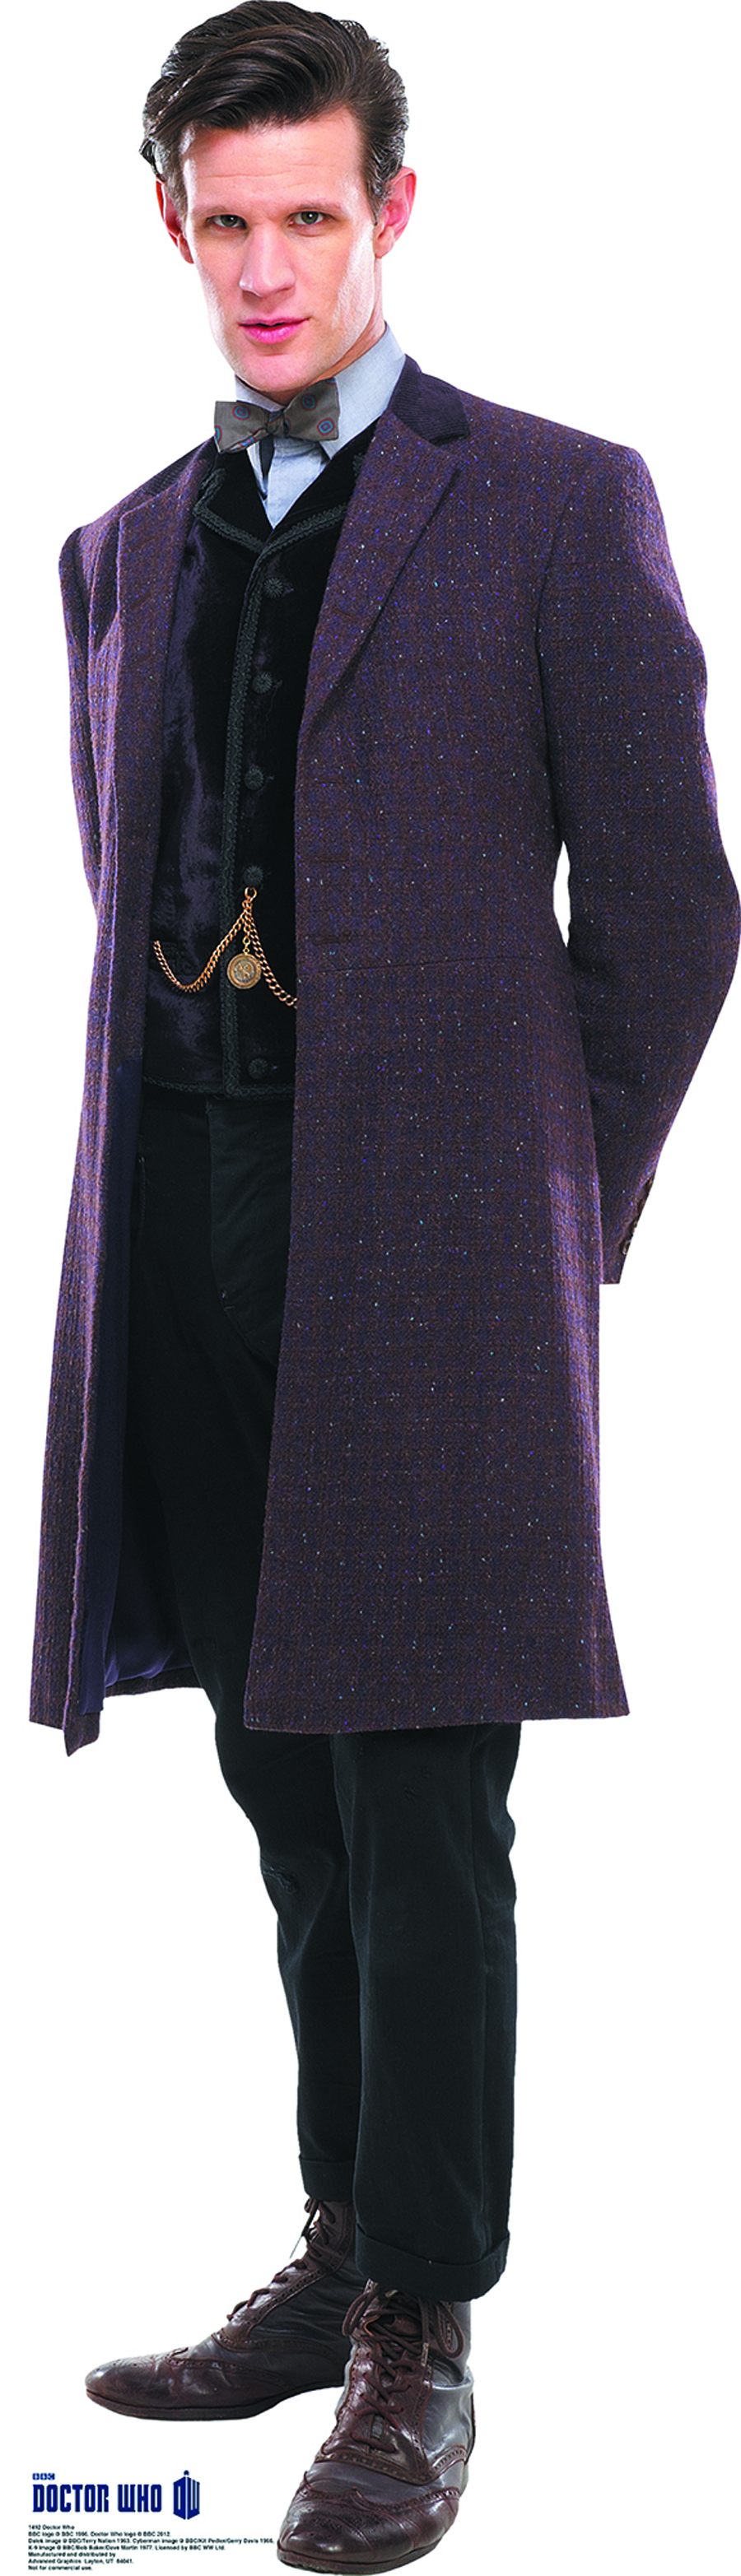 JUN132230 - DOCTOR WHO 11TH DOCTOR NEW LIFE-SIZE STANDUP - Previews World